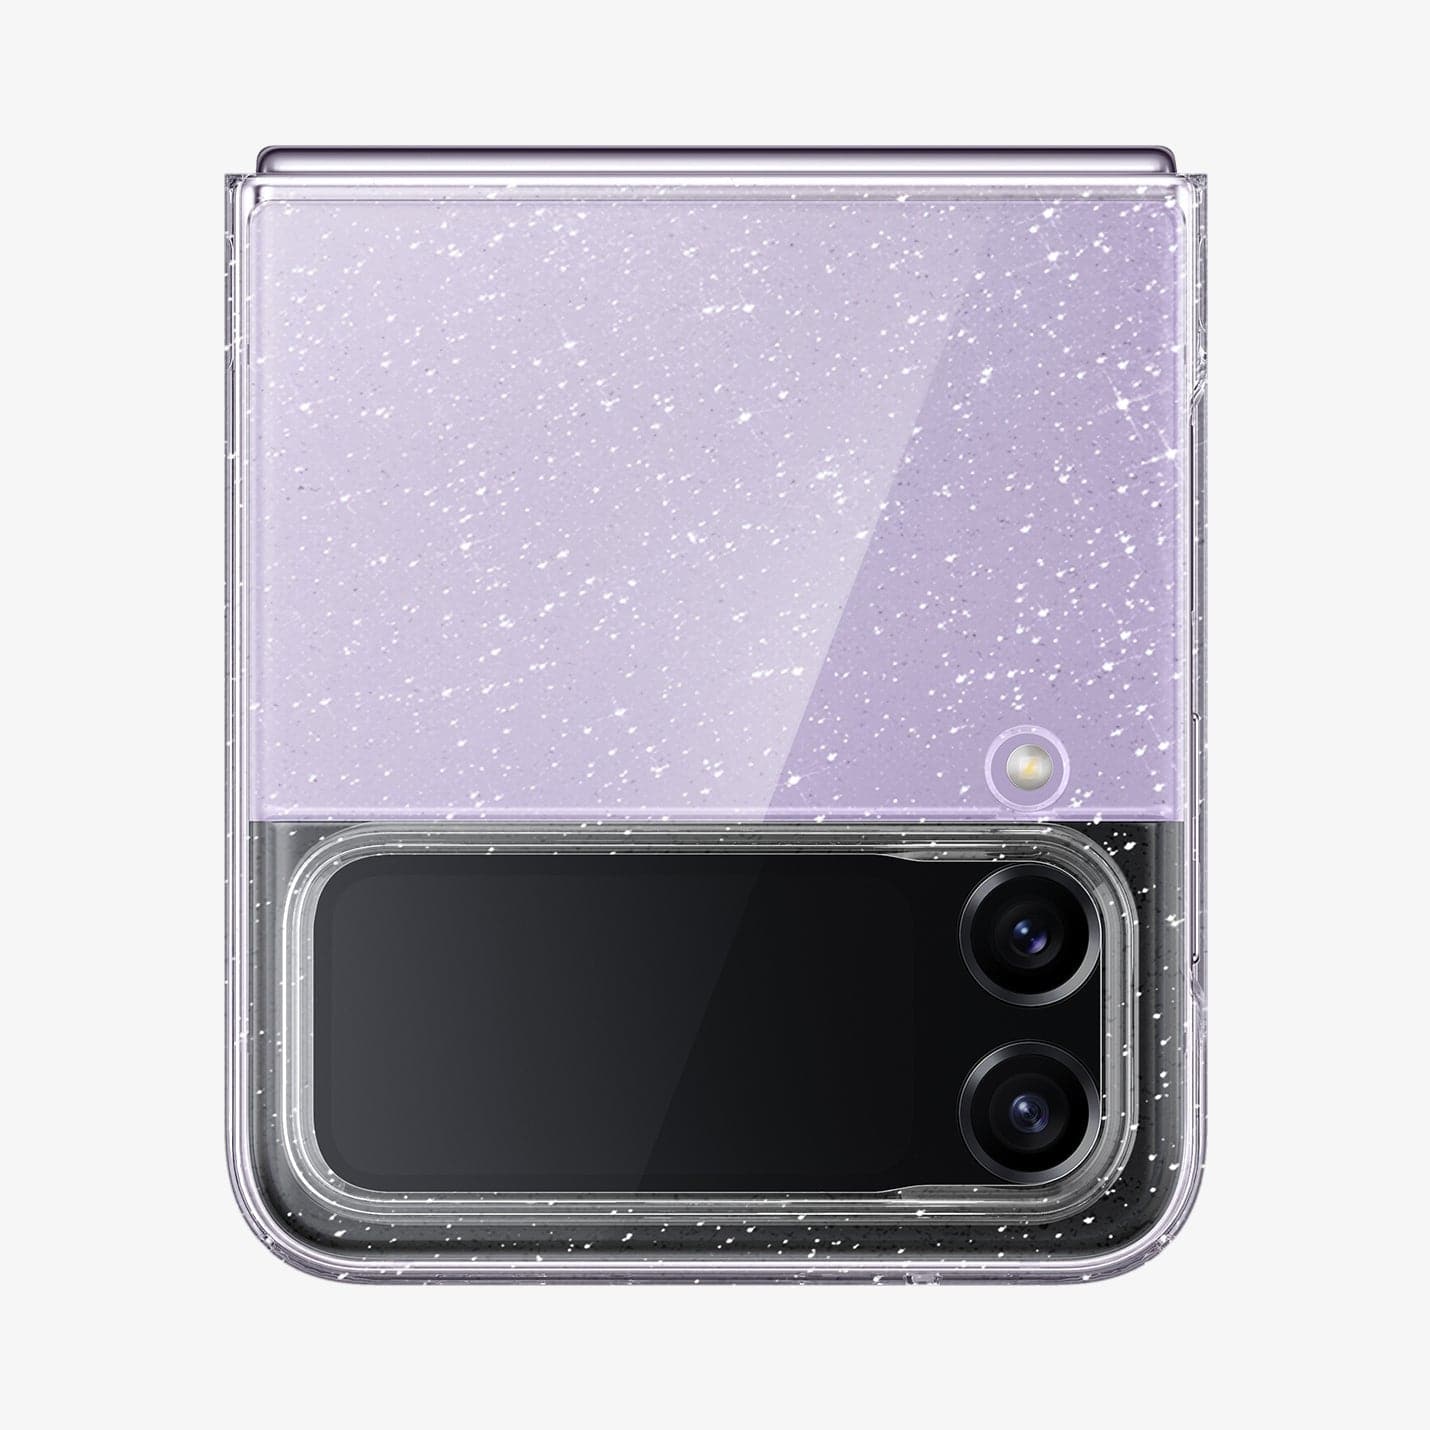 ACS05113 - Galaxy Z Flip 4 Case Air Skin Glitter in crystal quartz showing the back with camera lens with device folded